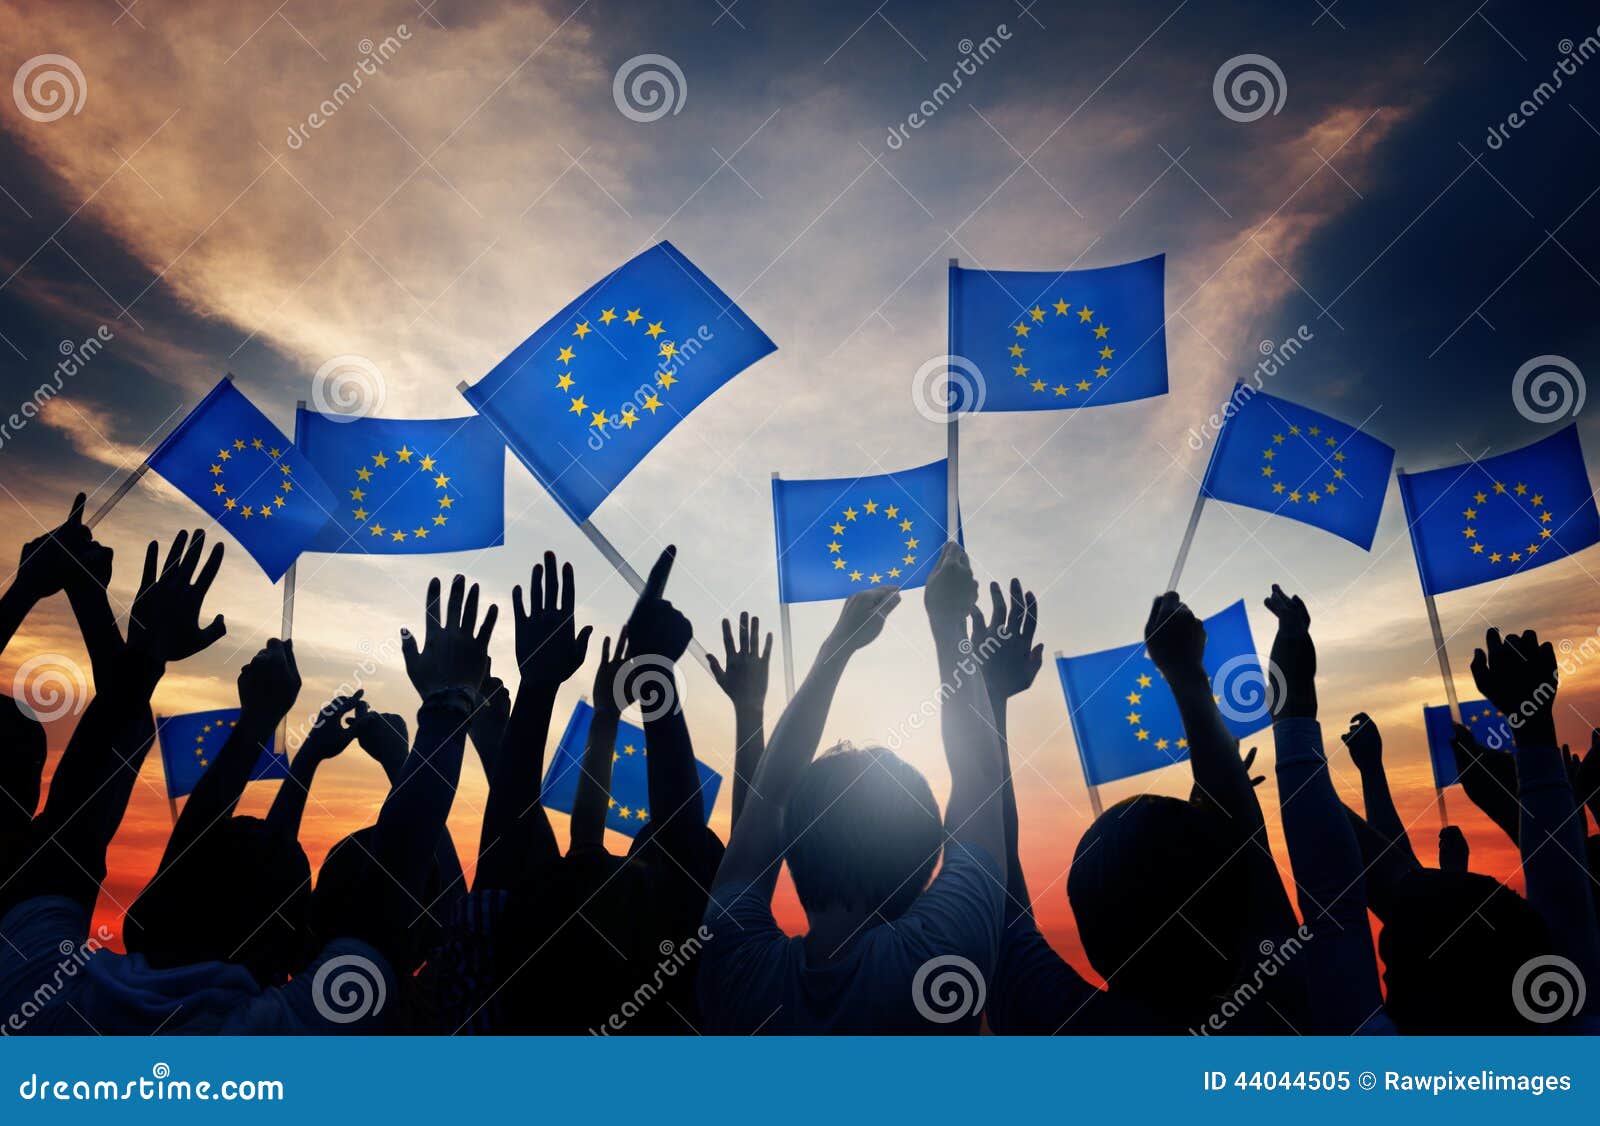 group of people waving european union flags